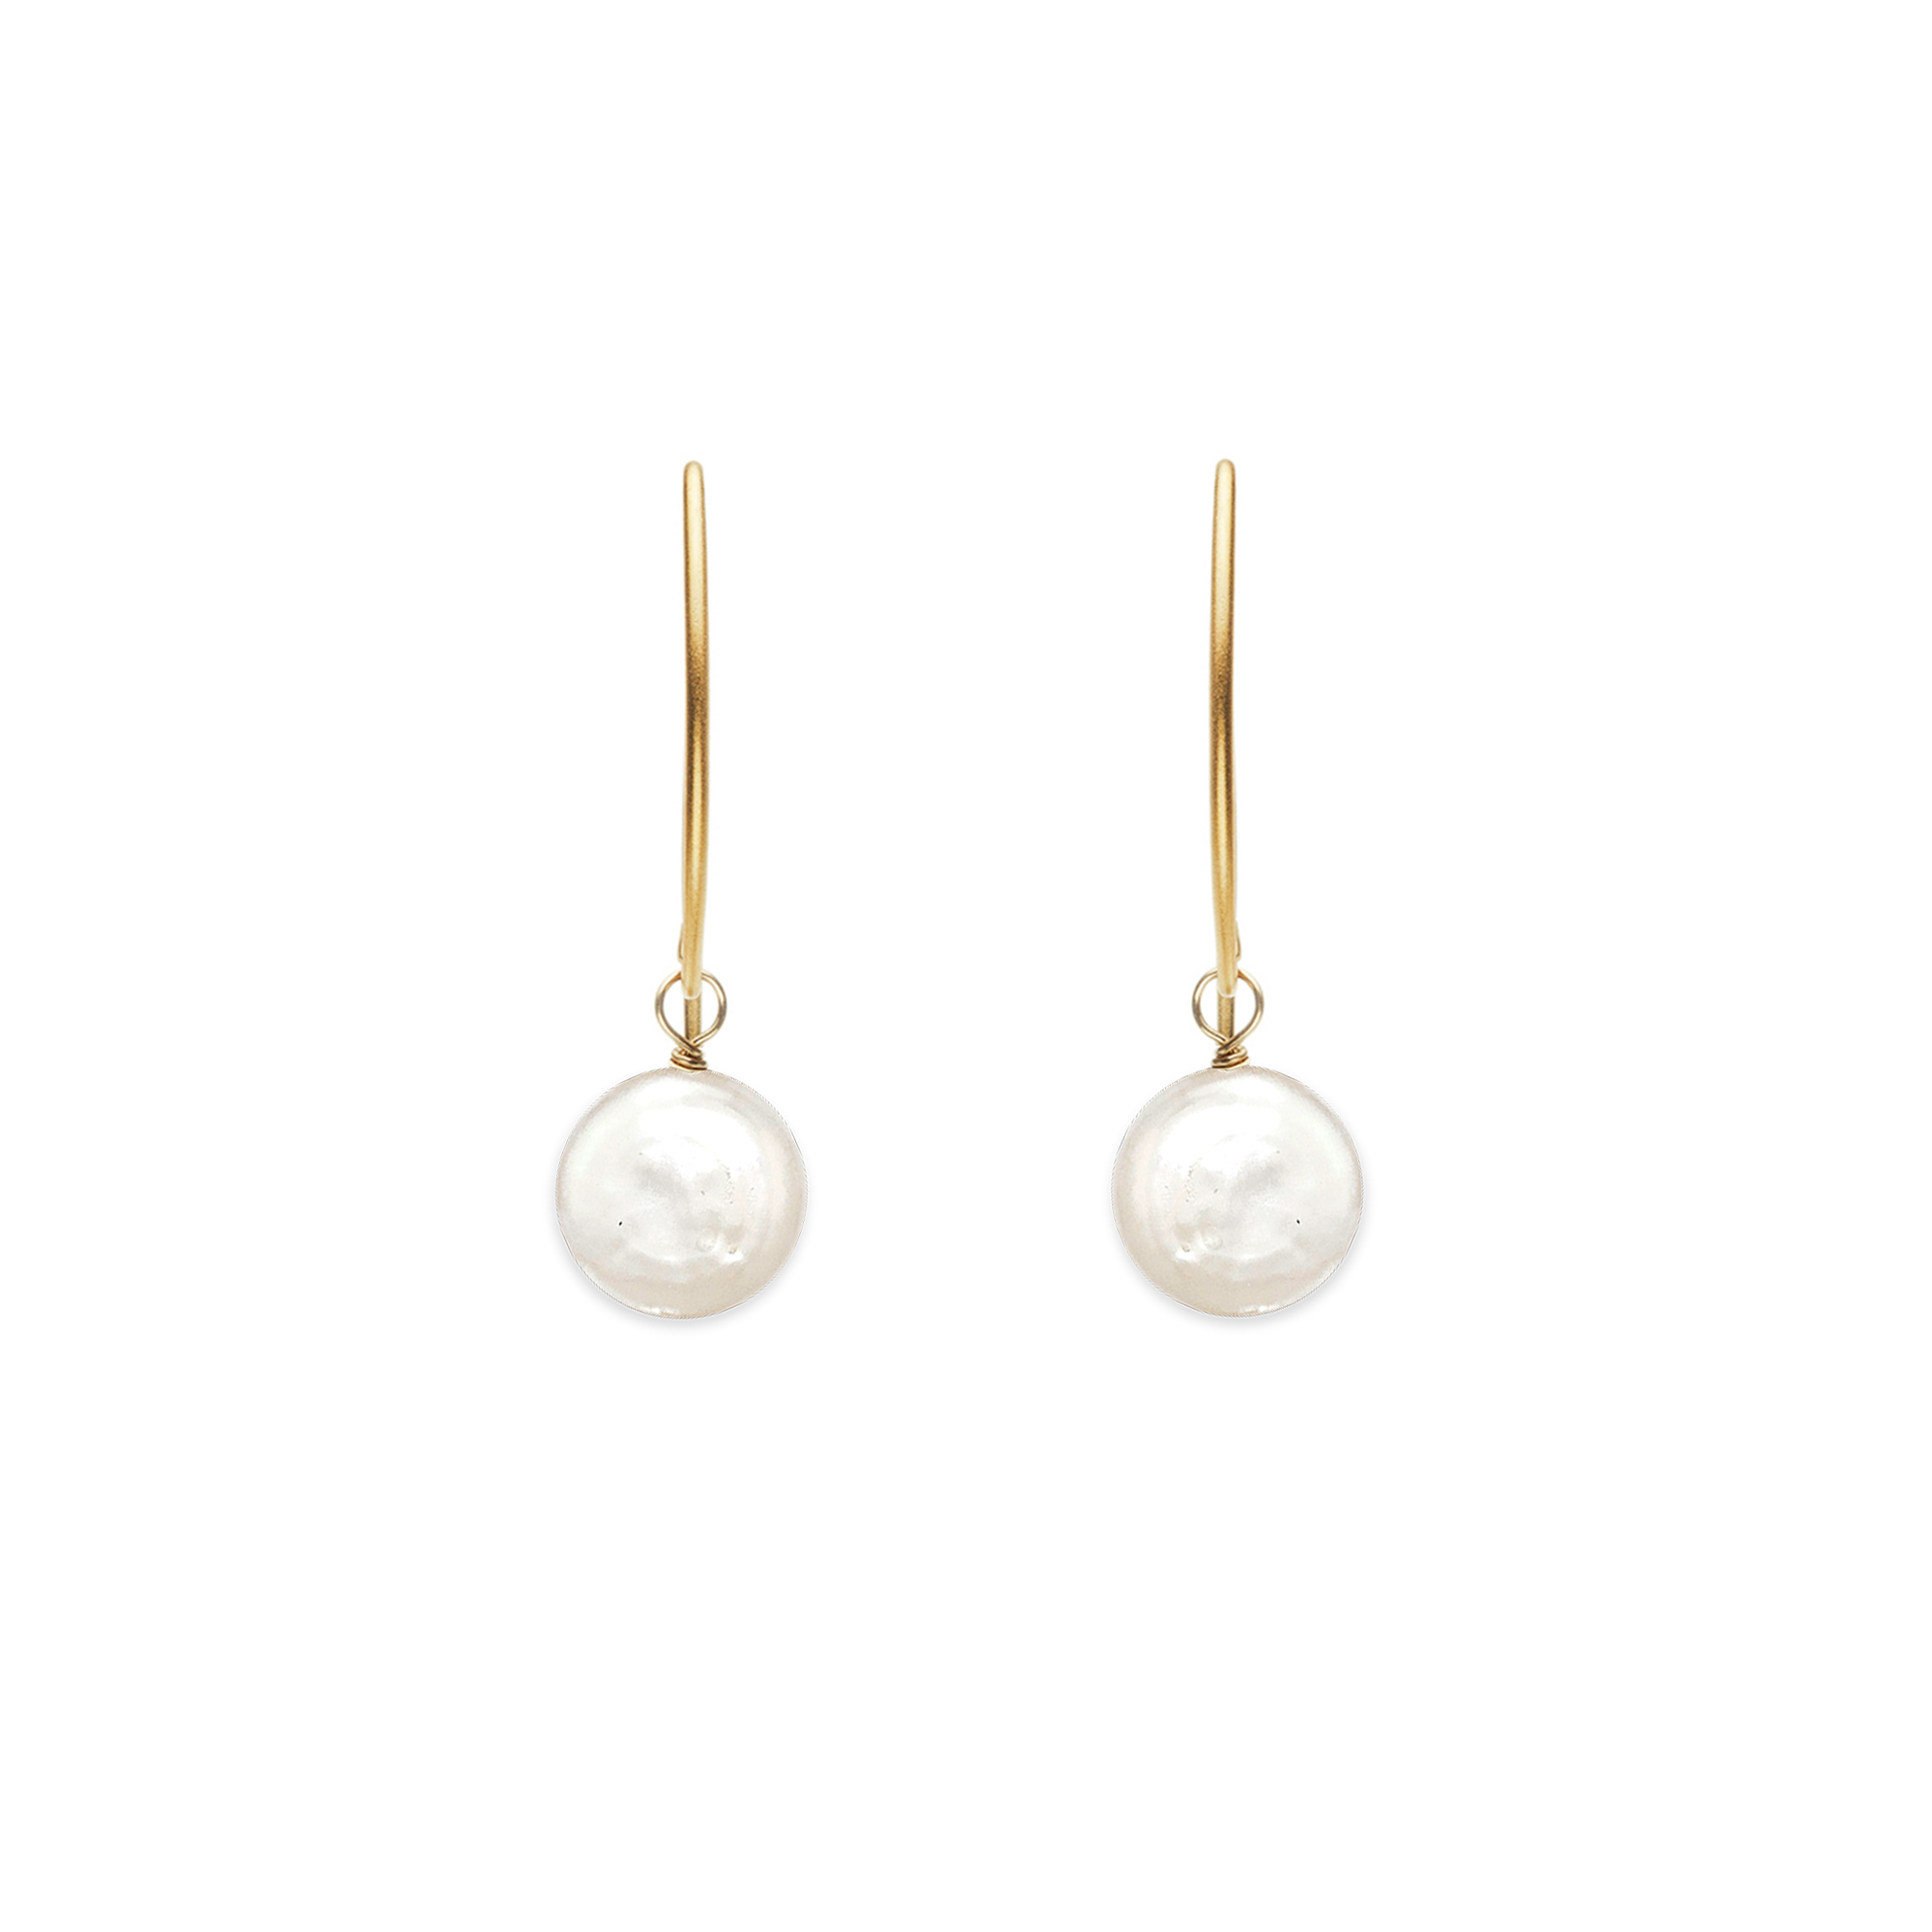 Image of gold dangle earrings with white coin pearl on white background